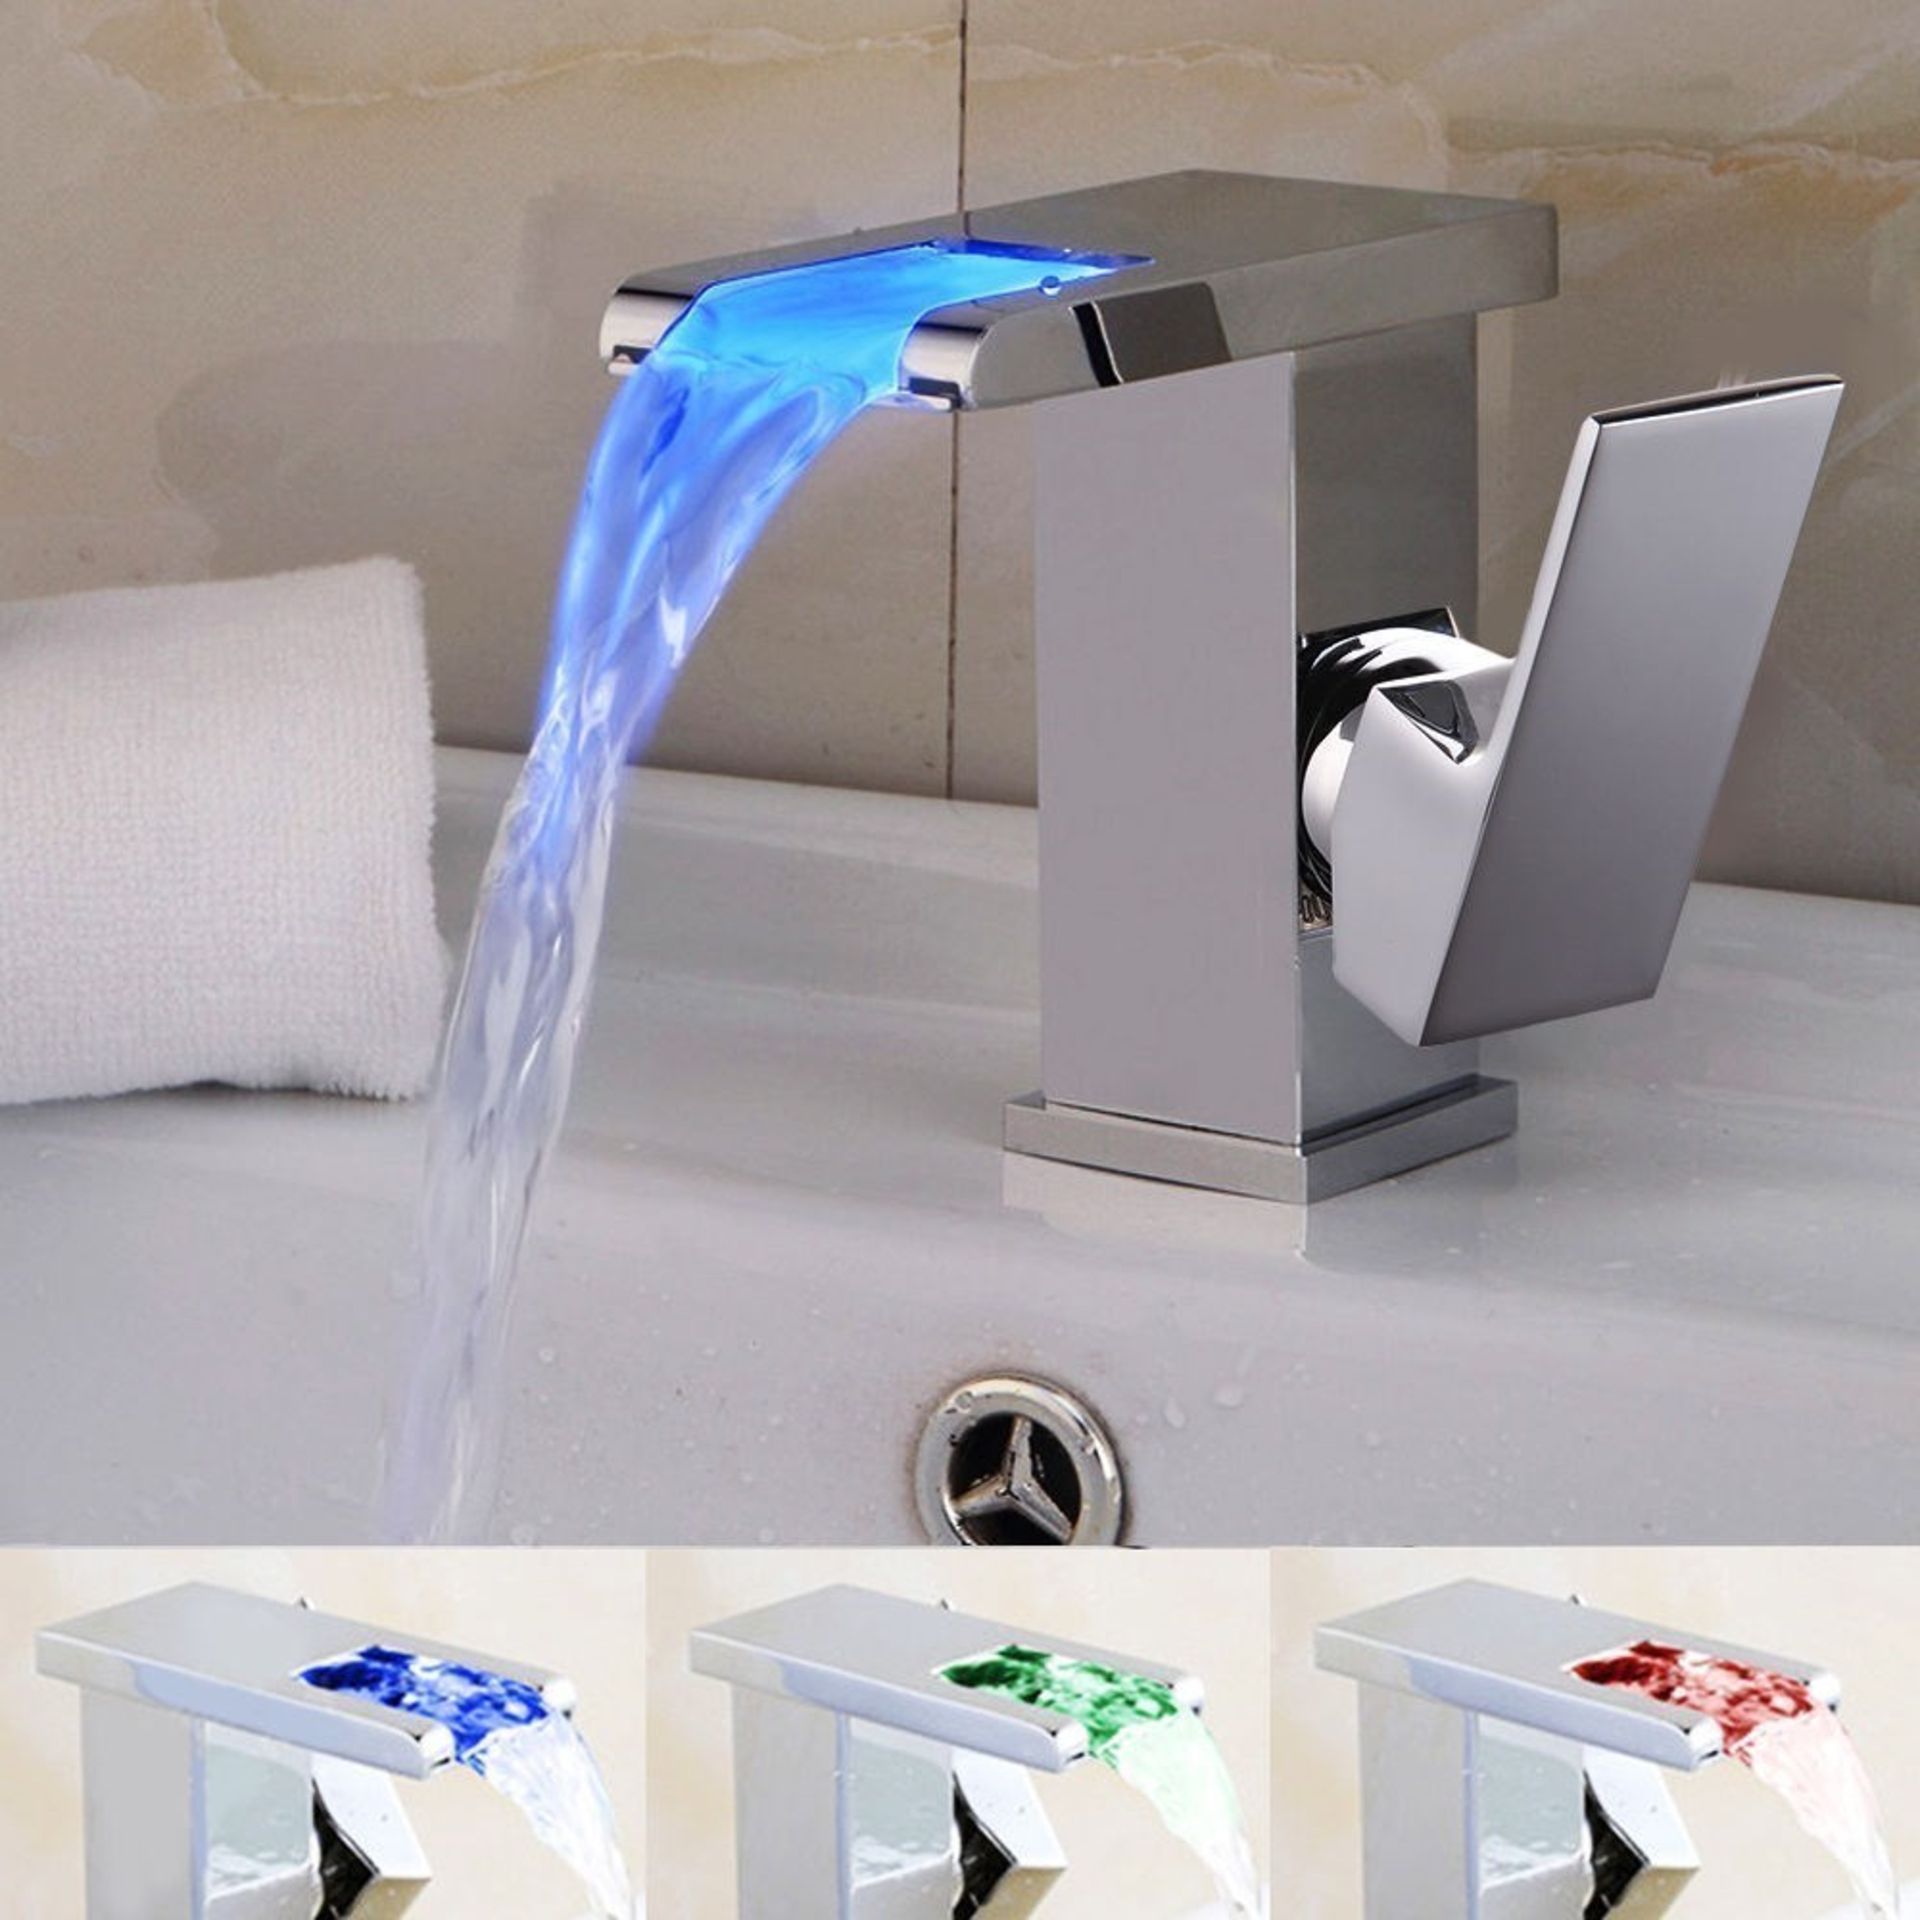 LED Waterfall Bathroom Basin Mixer Tap. RRP £229.99.Easy to install and clean. All copper mo...